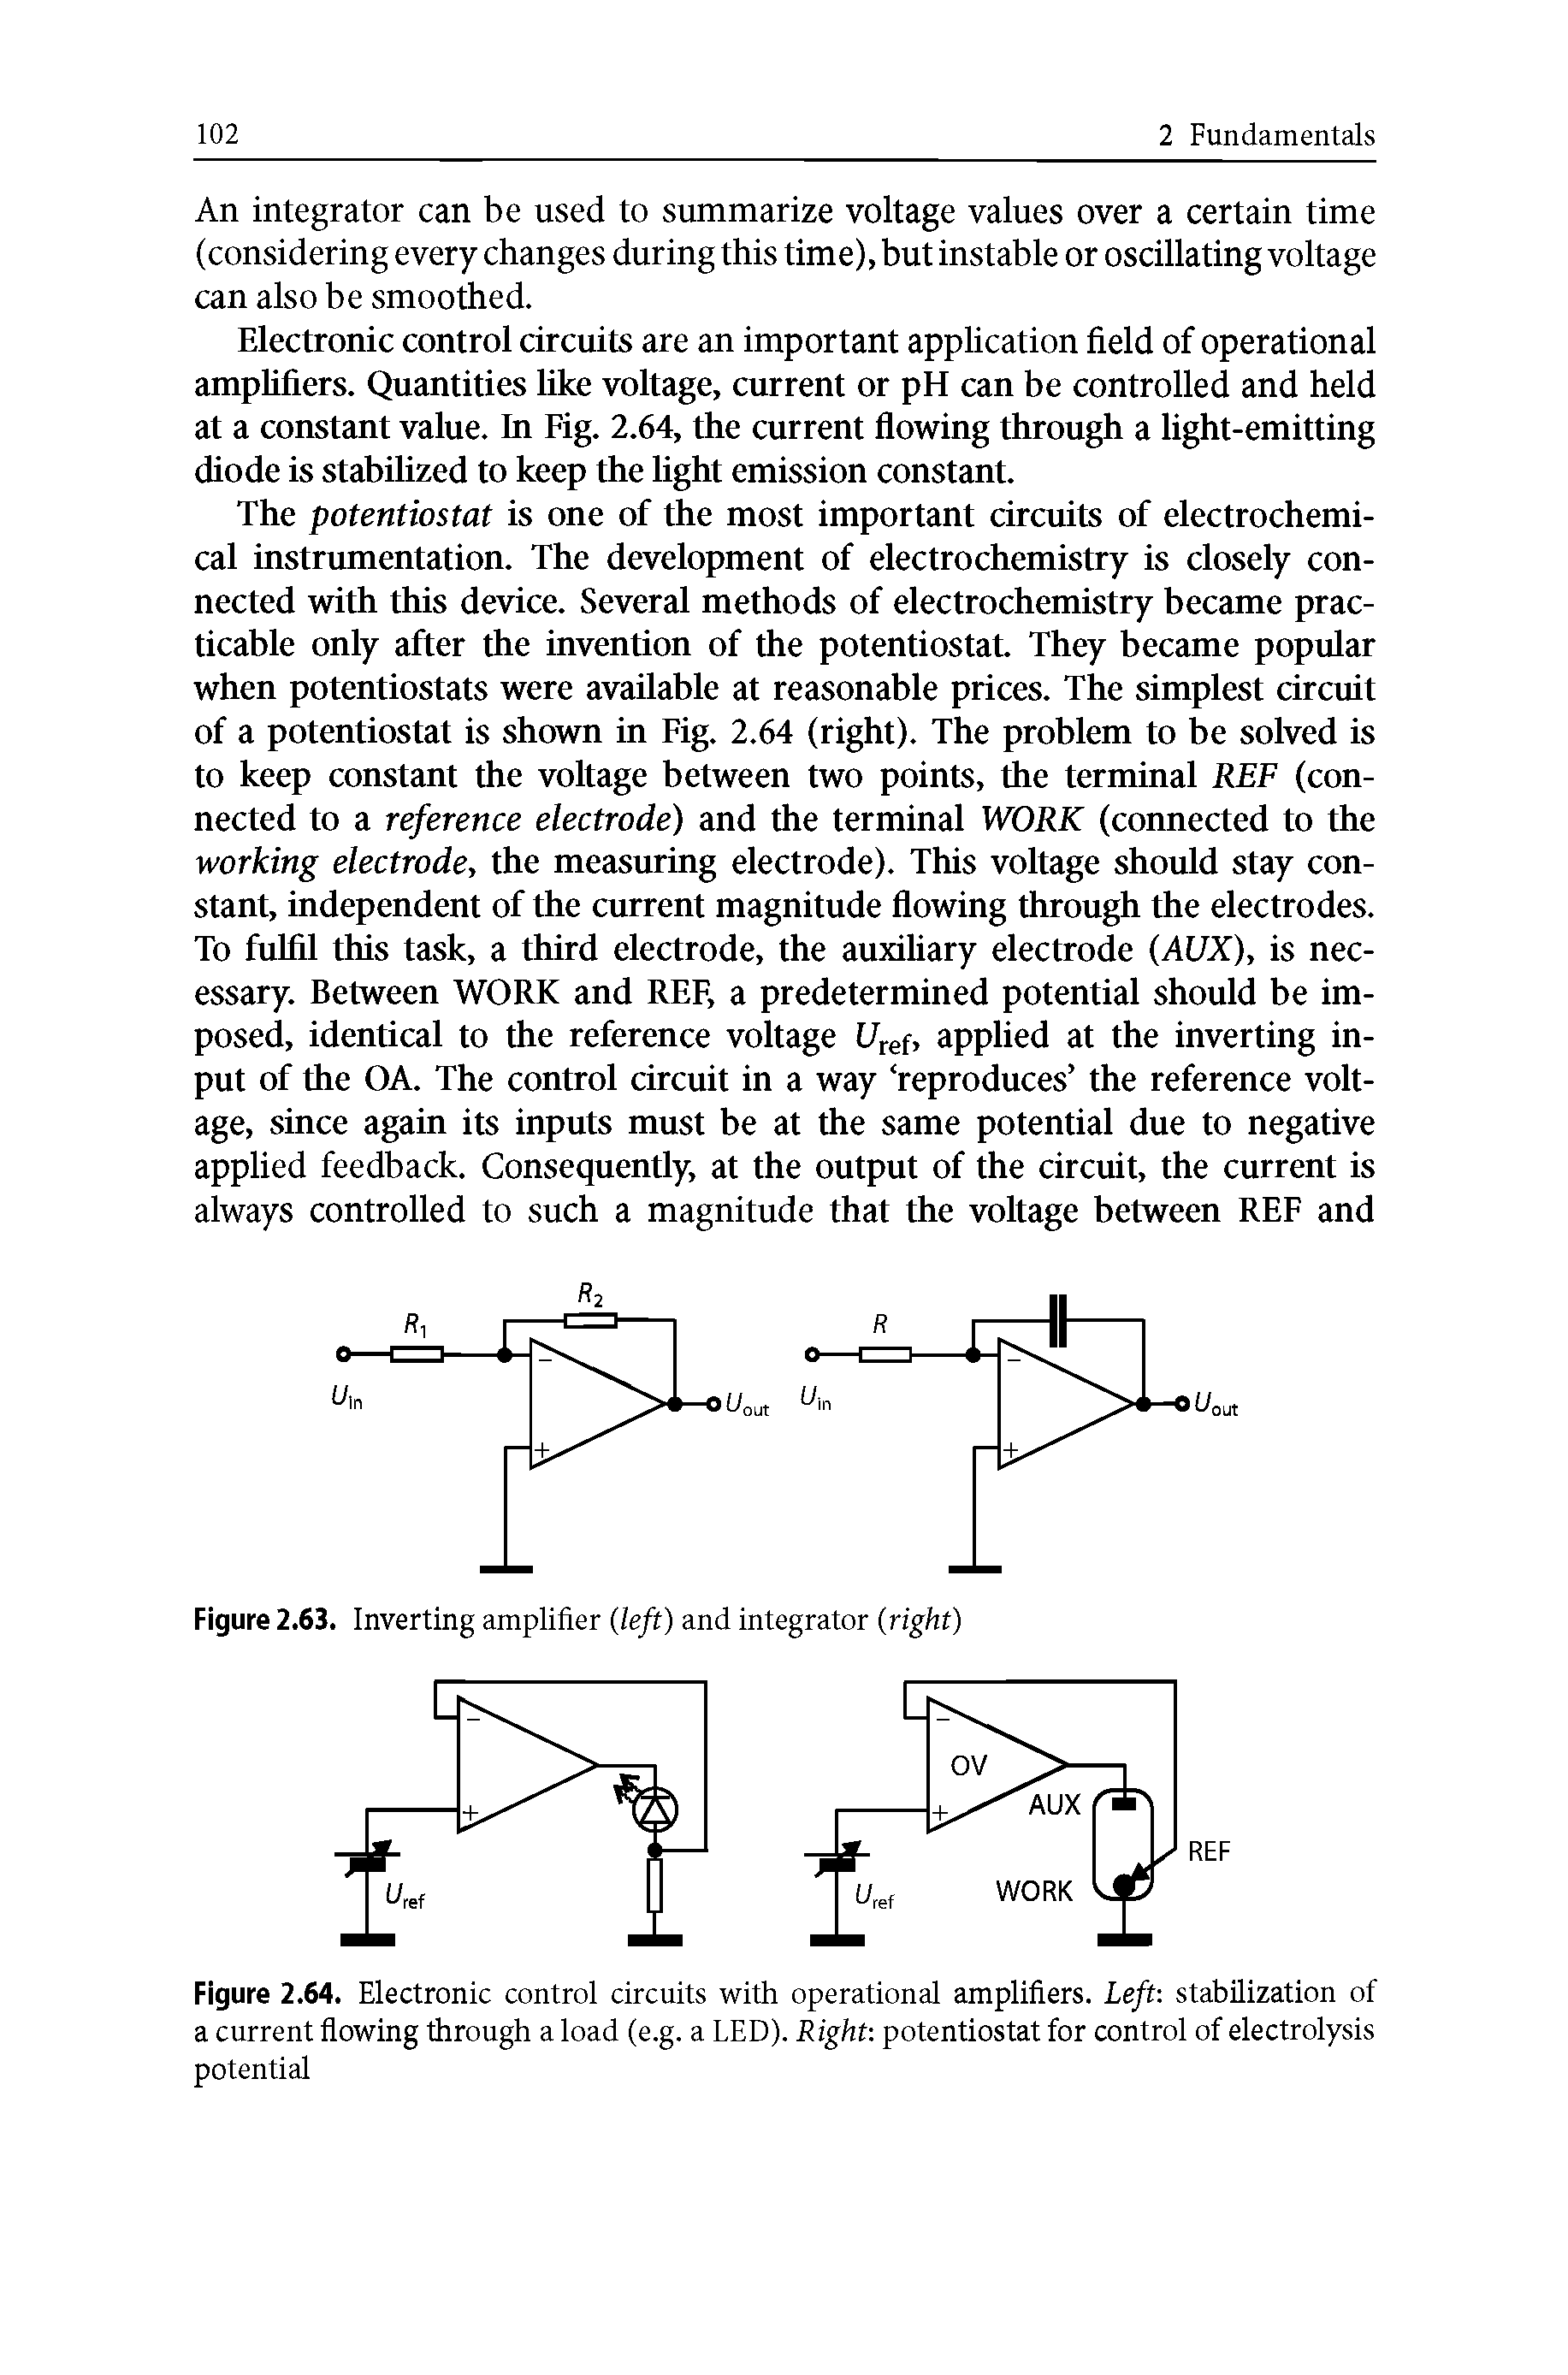 Figure 2.64. Electronic control circuits with operational amplifiers. Left stabilization of a current flowing through a load (e.g. a LED). Right potentiostat for control of electrolysis potential...